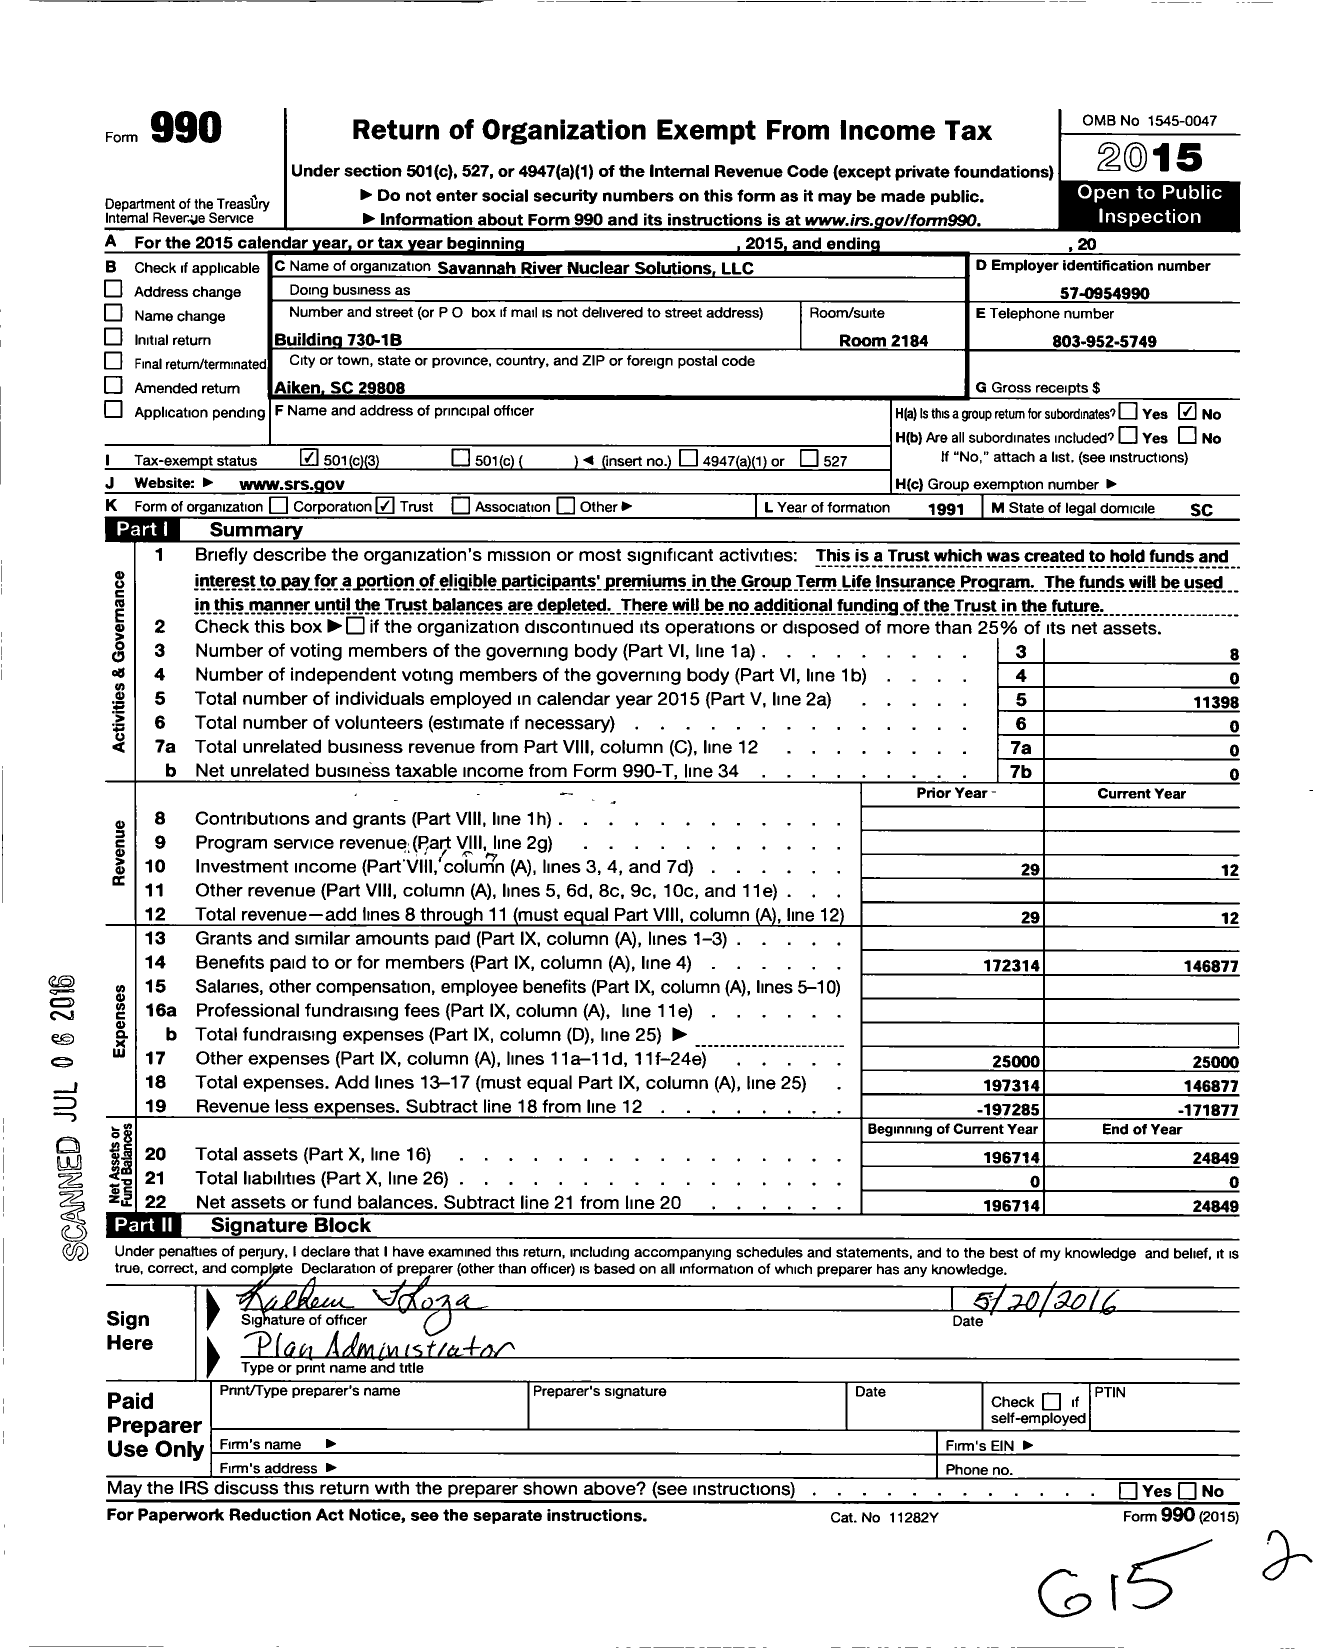 Image of first page of 2015 Form 990 for Westinghouse Savannah River Company Bechtel Savannah River